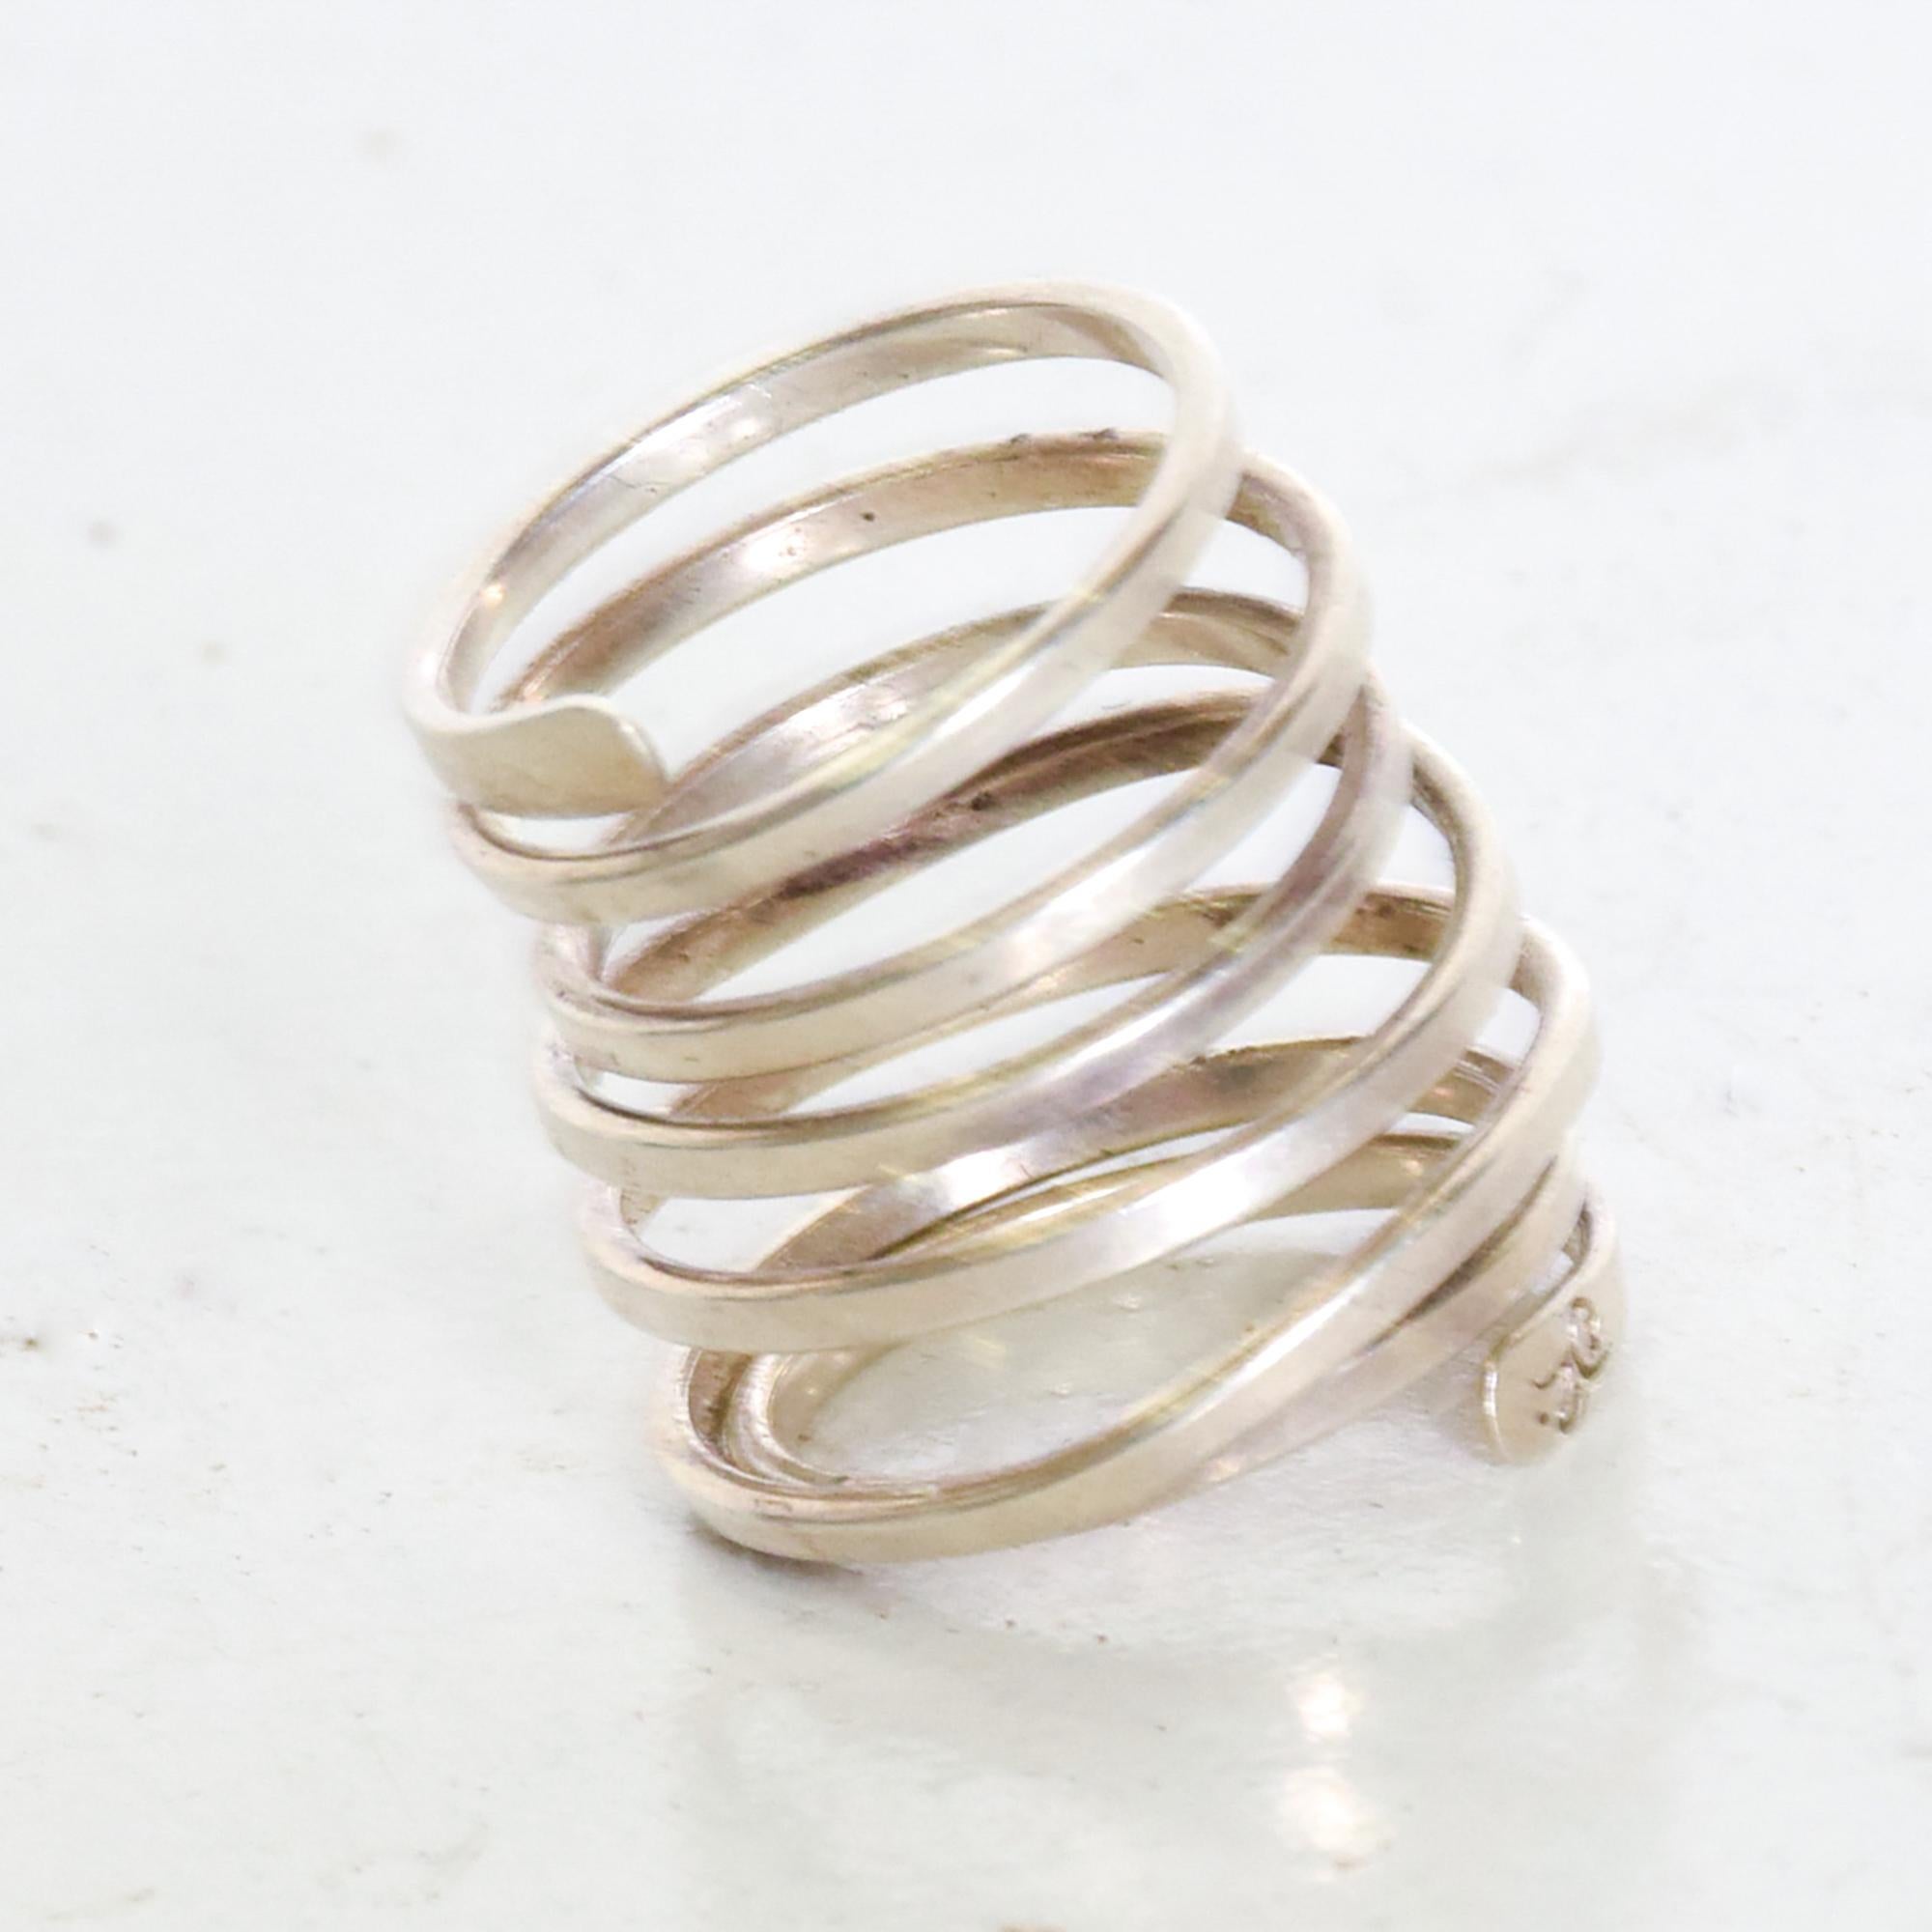 For your consideration: Mid century Taxco modernism sterling silver Artisan coiled spiral serpent wrap -around fashion ring.
Stamped, signature markings hard to read. In the manner of Los Castillo.
Dimensions: 1